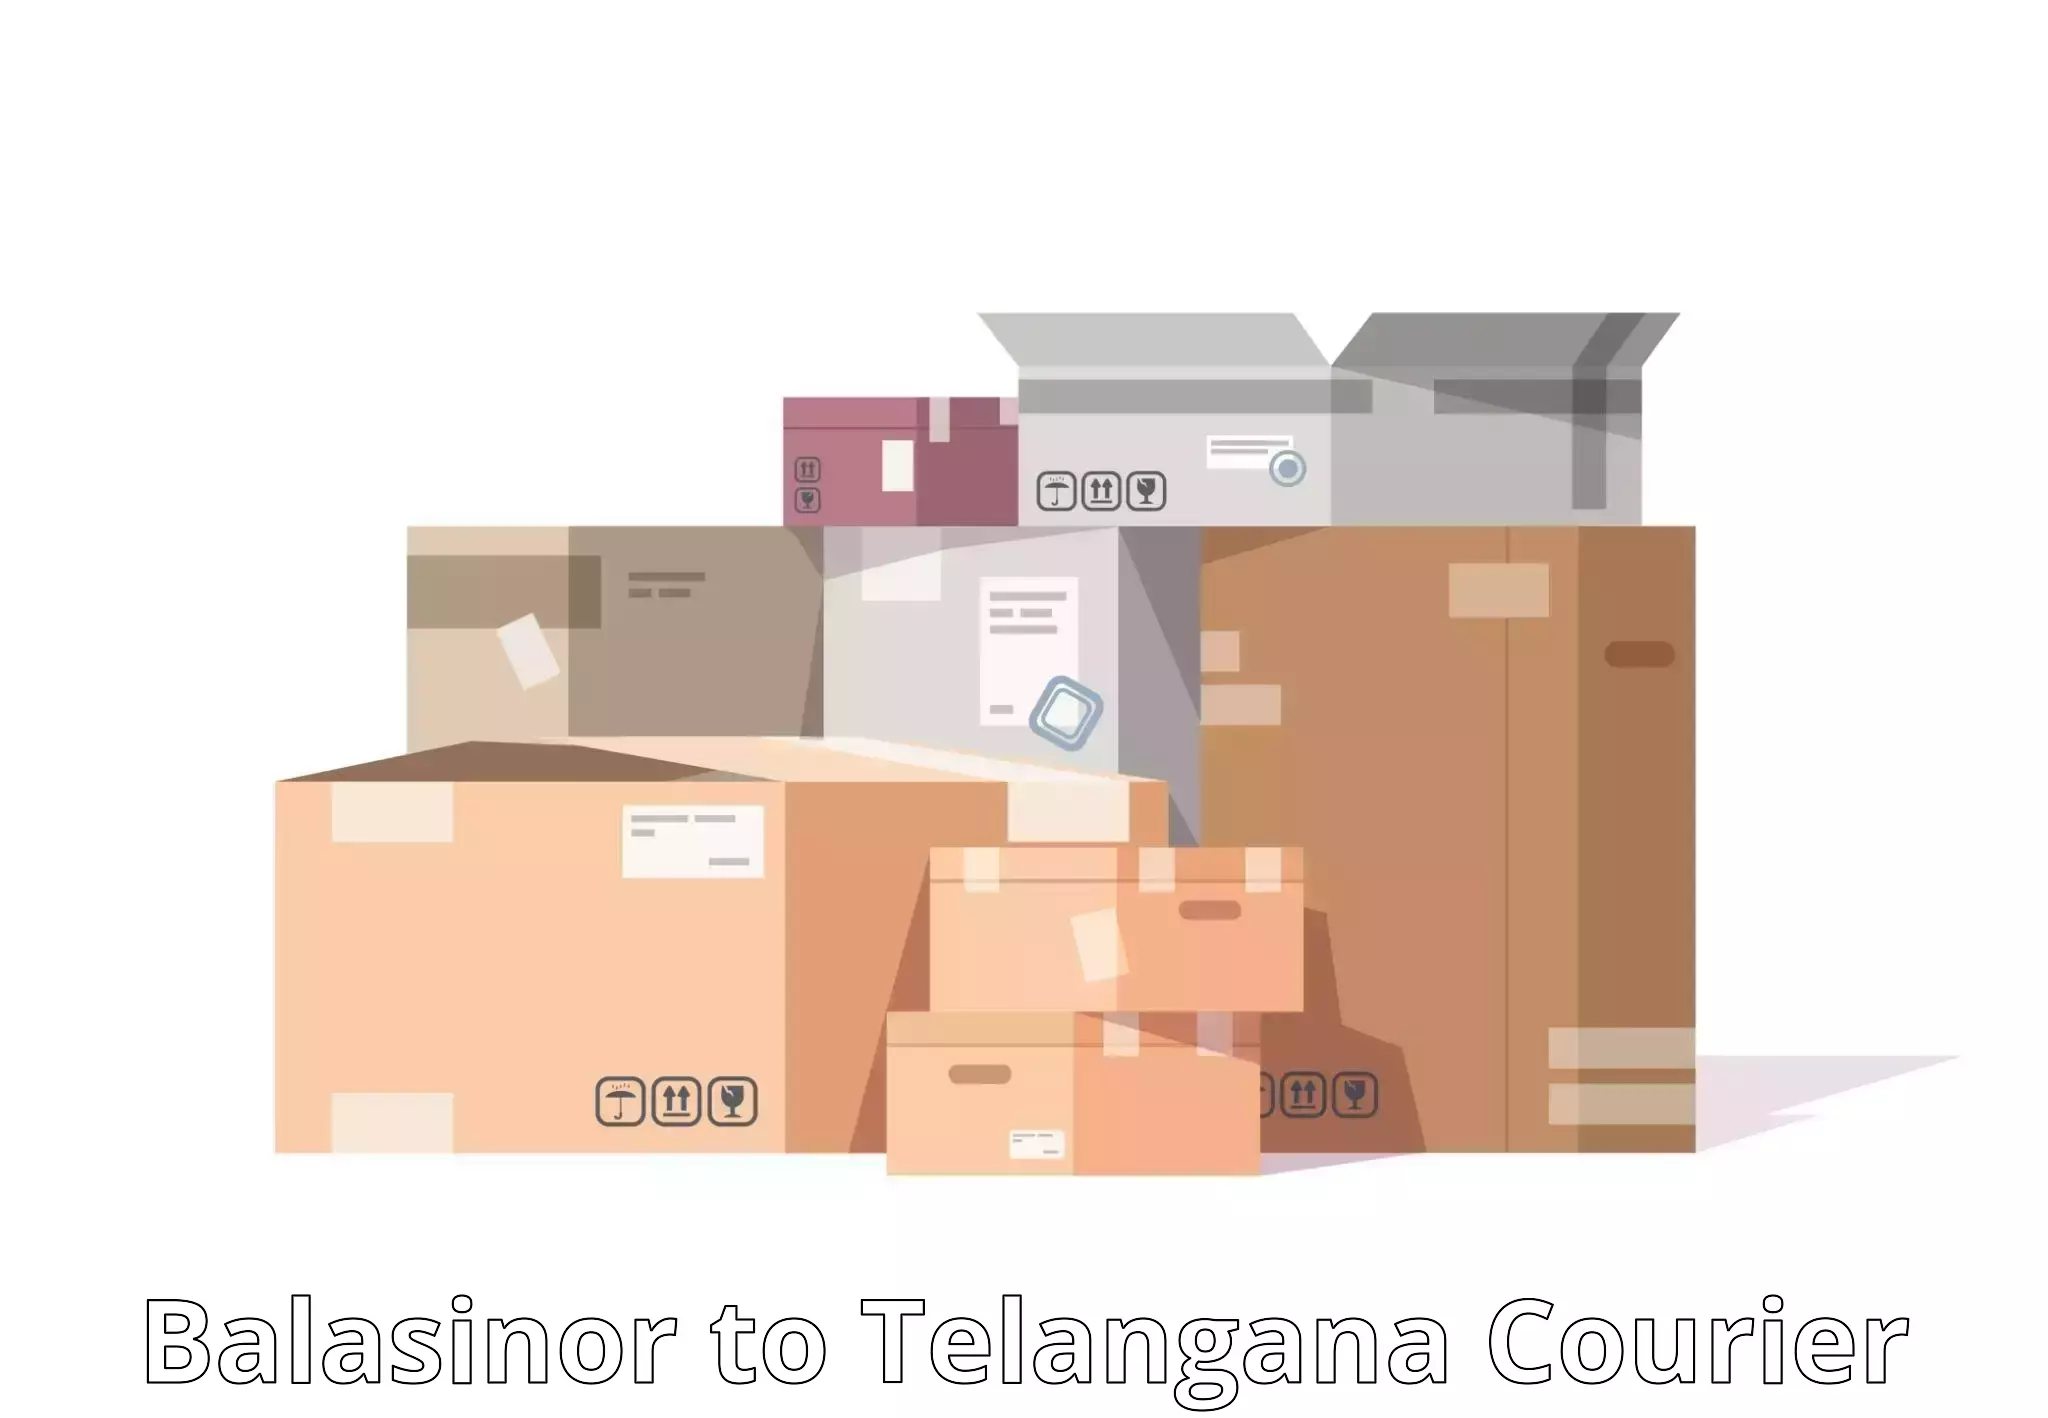 Parcel service for businesses Balasinor to Bellampalli